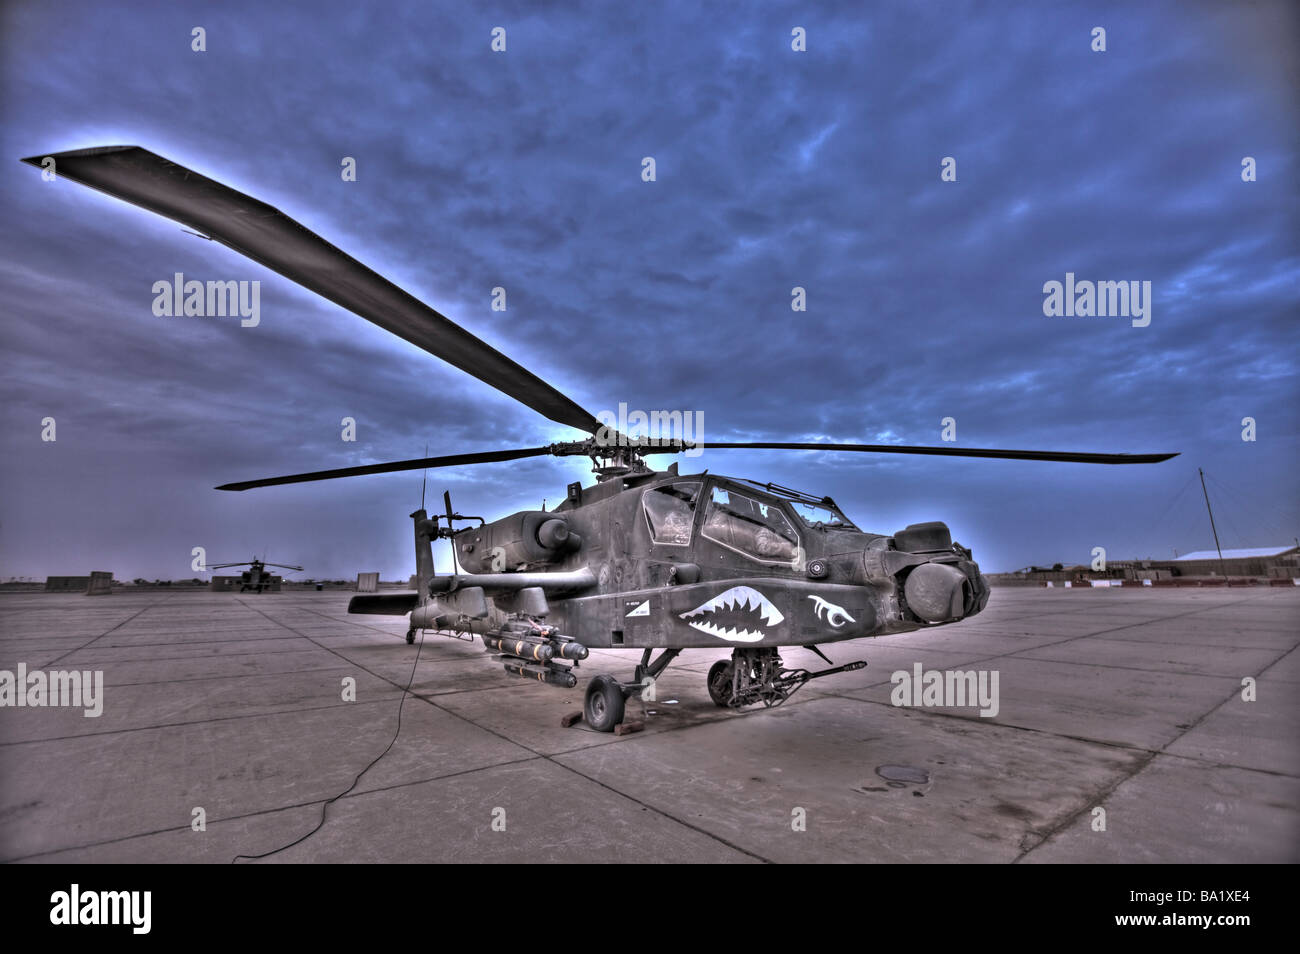 A seven exposure HDR image of a stationary AH-64D Apache helicopter. Stock Photo